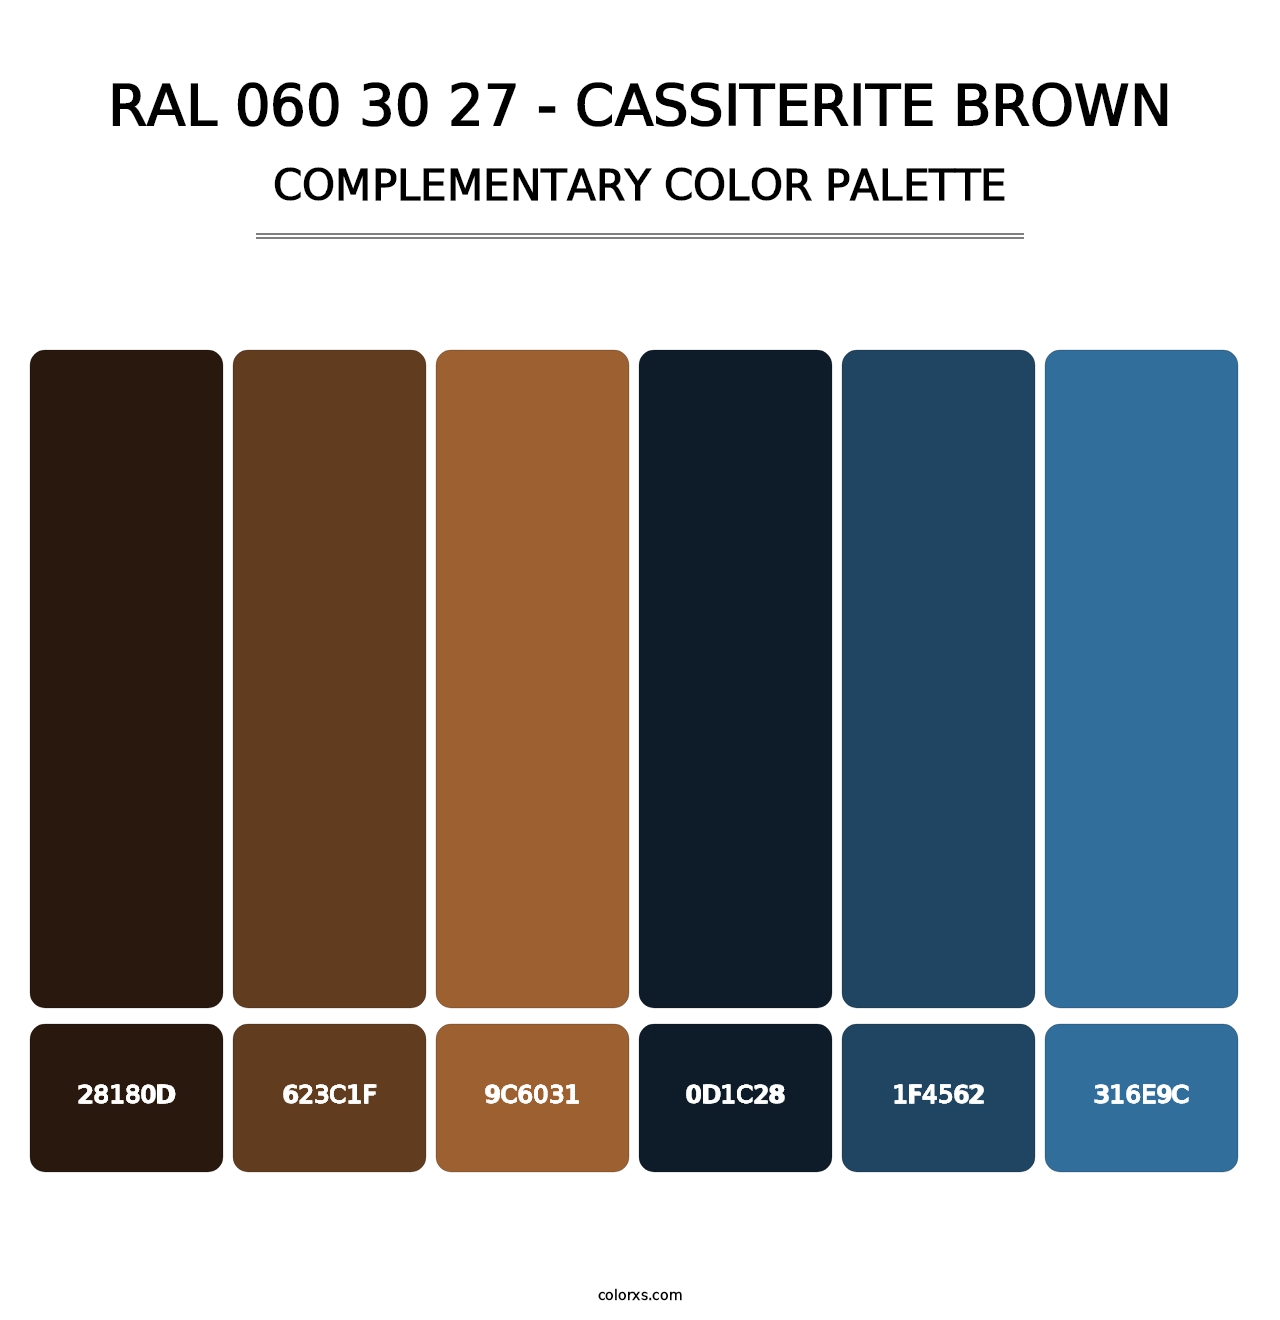 RAL 060 30 27 - Cassiterite Brown - Complementary Color Palette